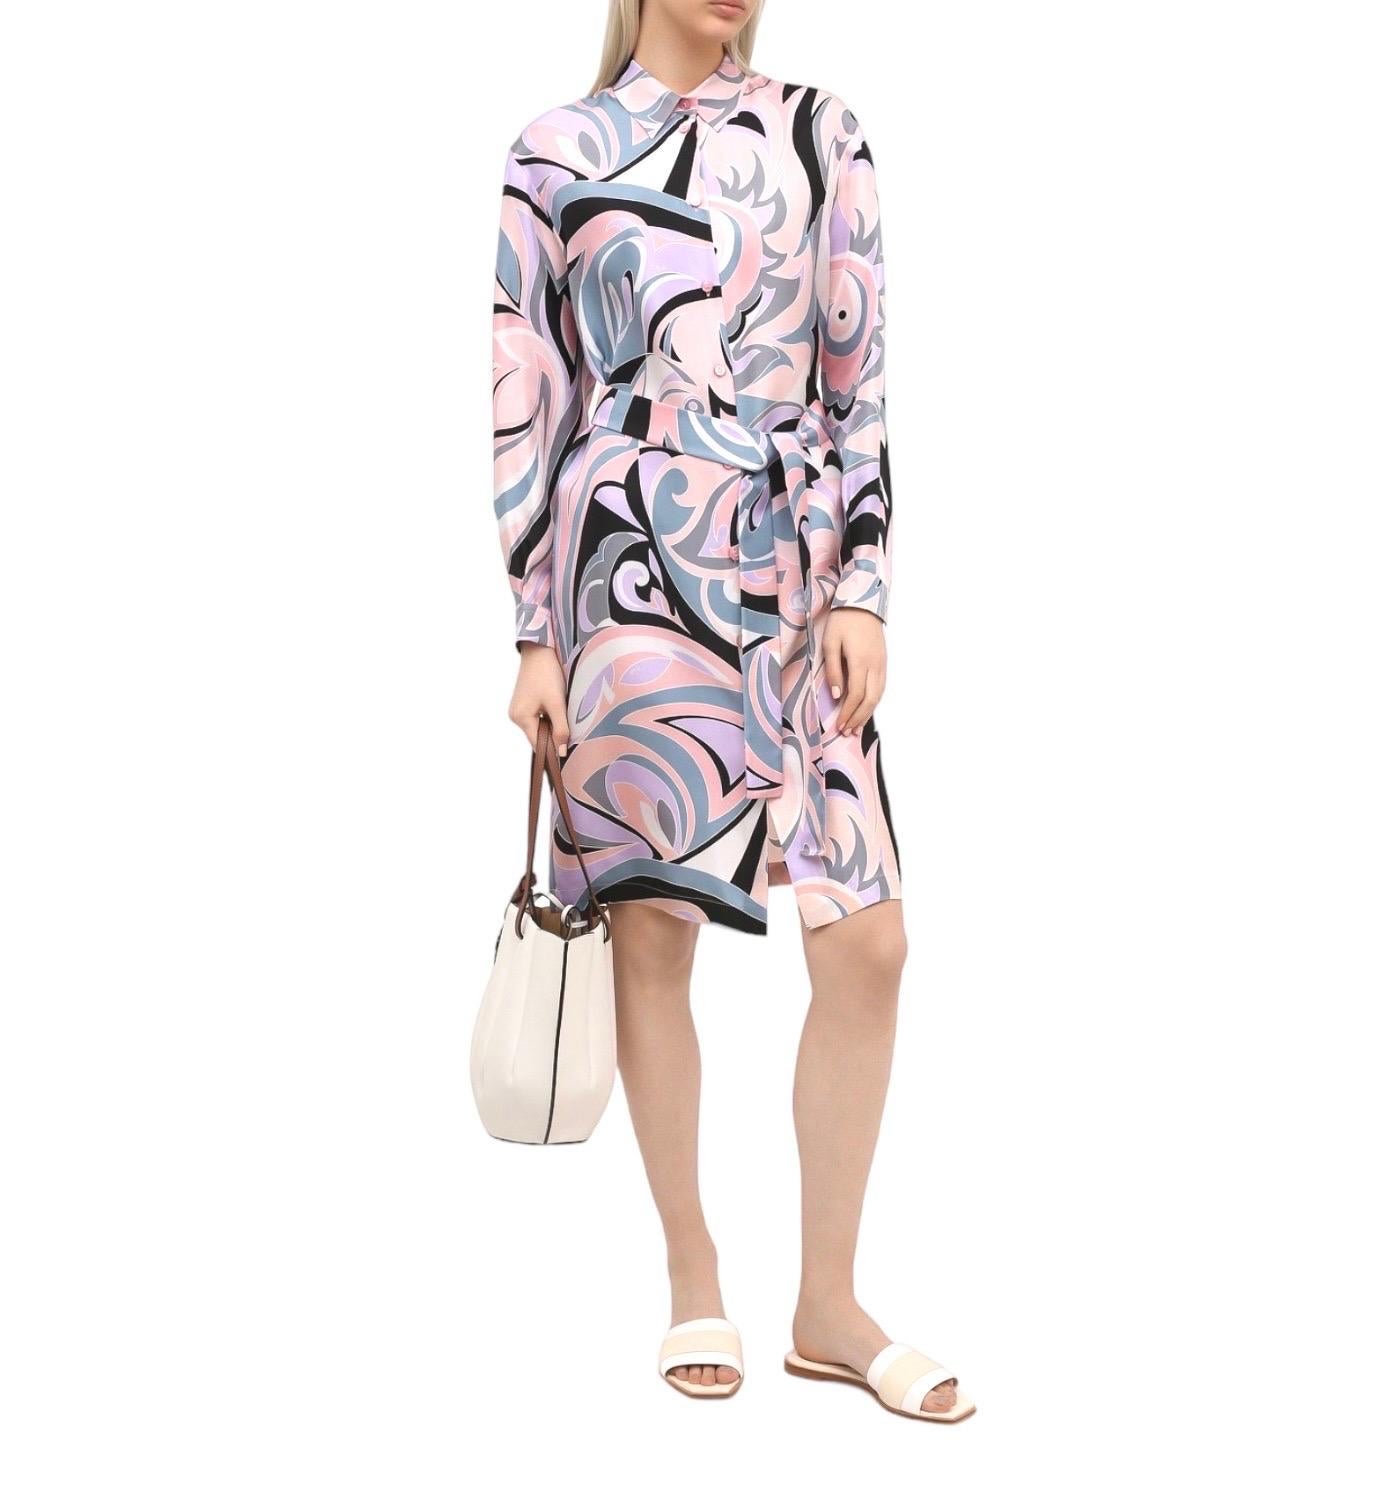 NEW Emilio Pucci Signature Print Silk Shirt Dress with Belt 44 In Excellent Condition For Sale In Switzerland, CH